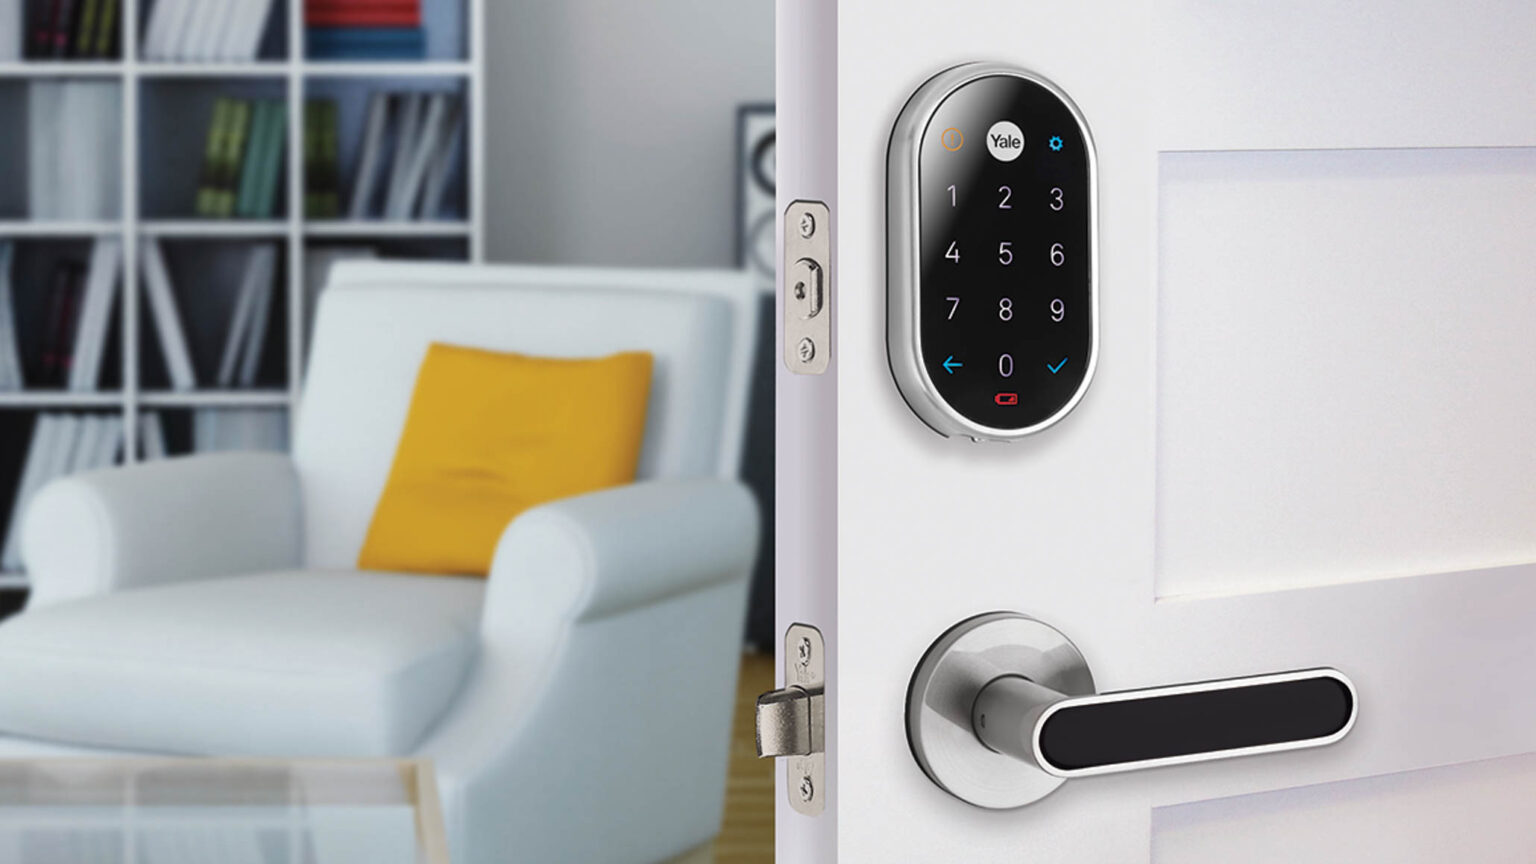 Smart door locks can be a secure addition to your rental property and a delight to tenants. Image: Nest and Yale.